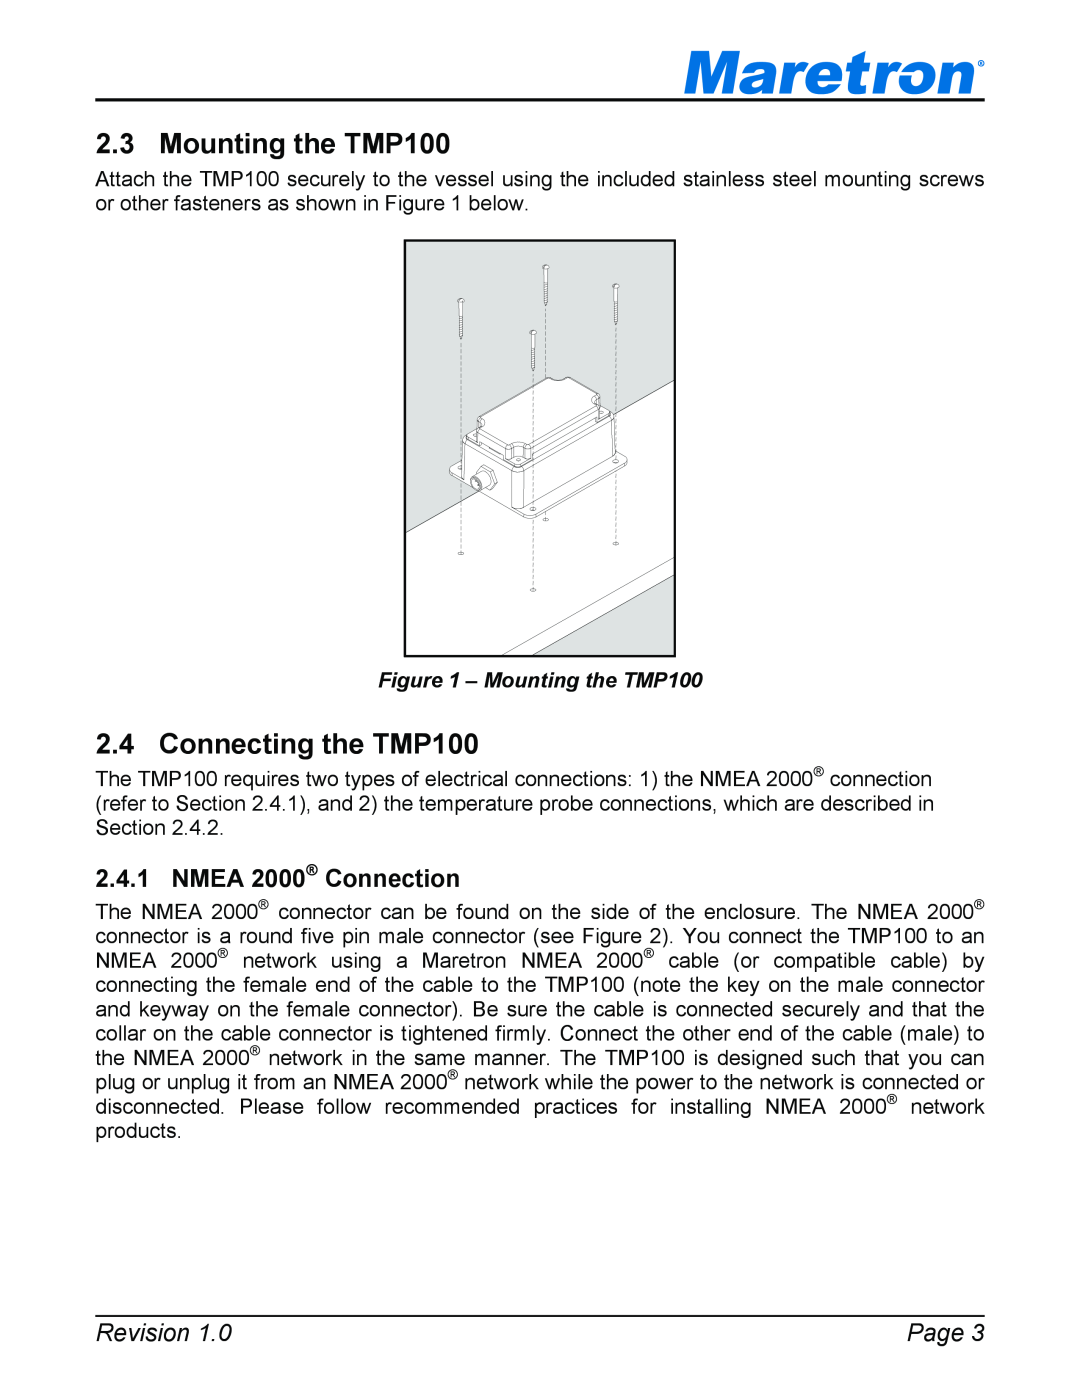 Maretron TP-EGT-1 user manual Mounting the TMP100, Connecting the TMP100, NMEA 2000 Connection, Revision, Page 